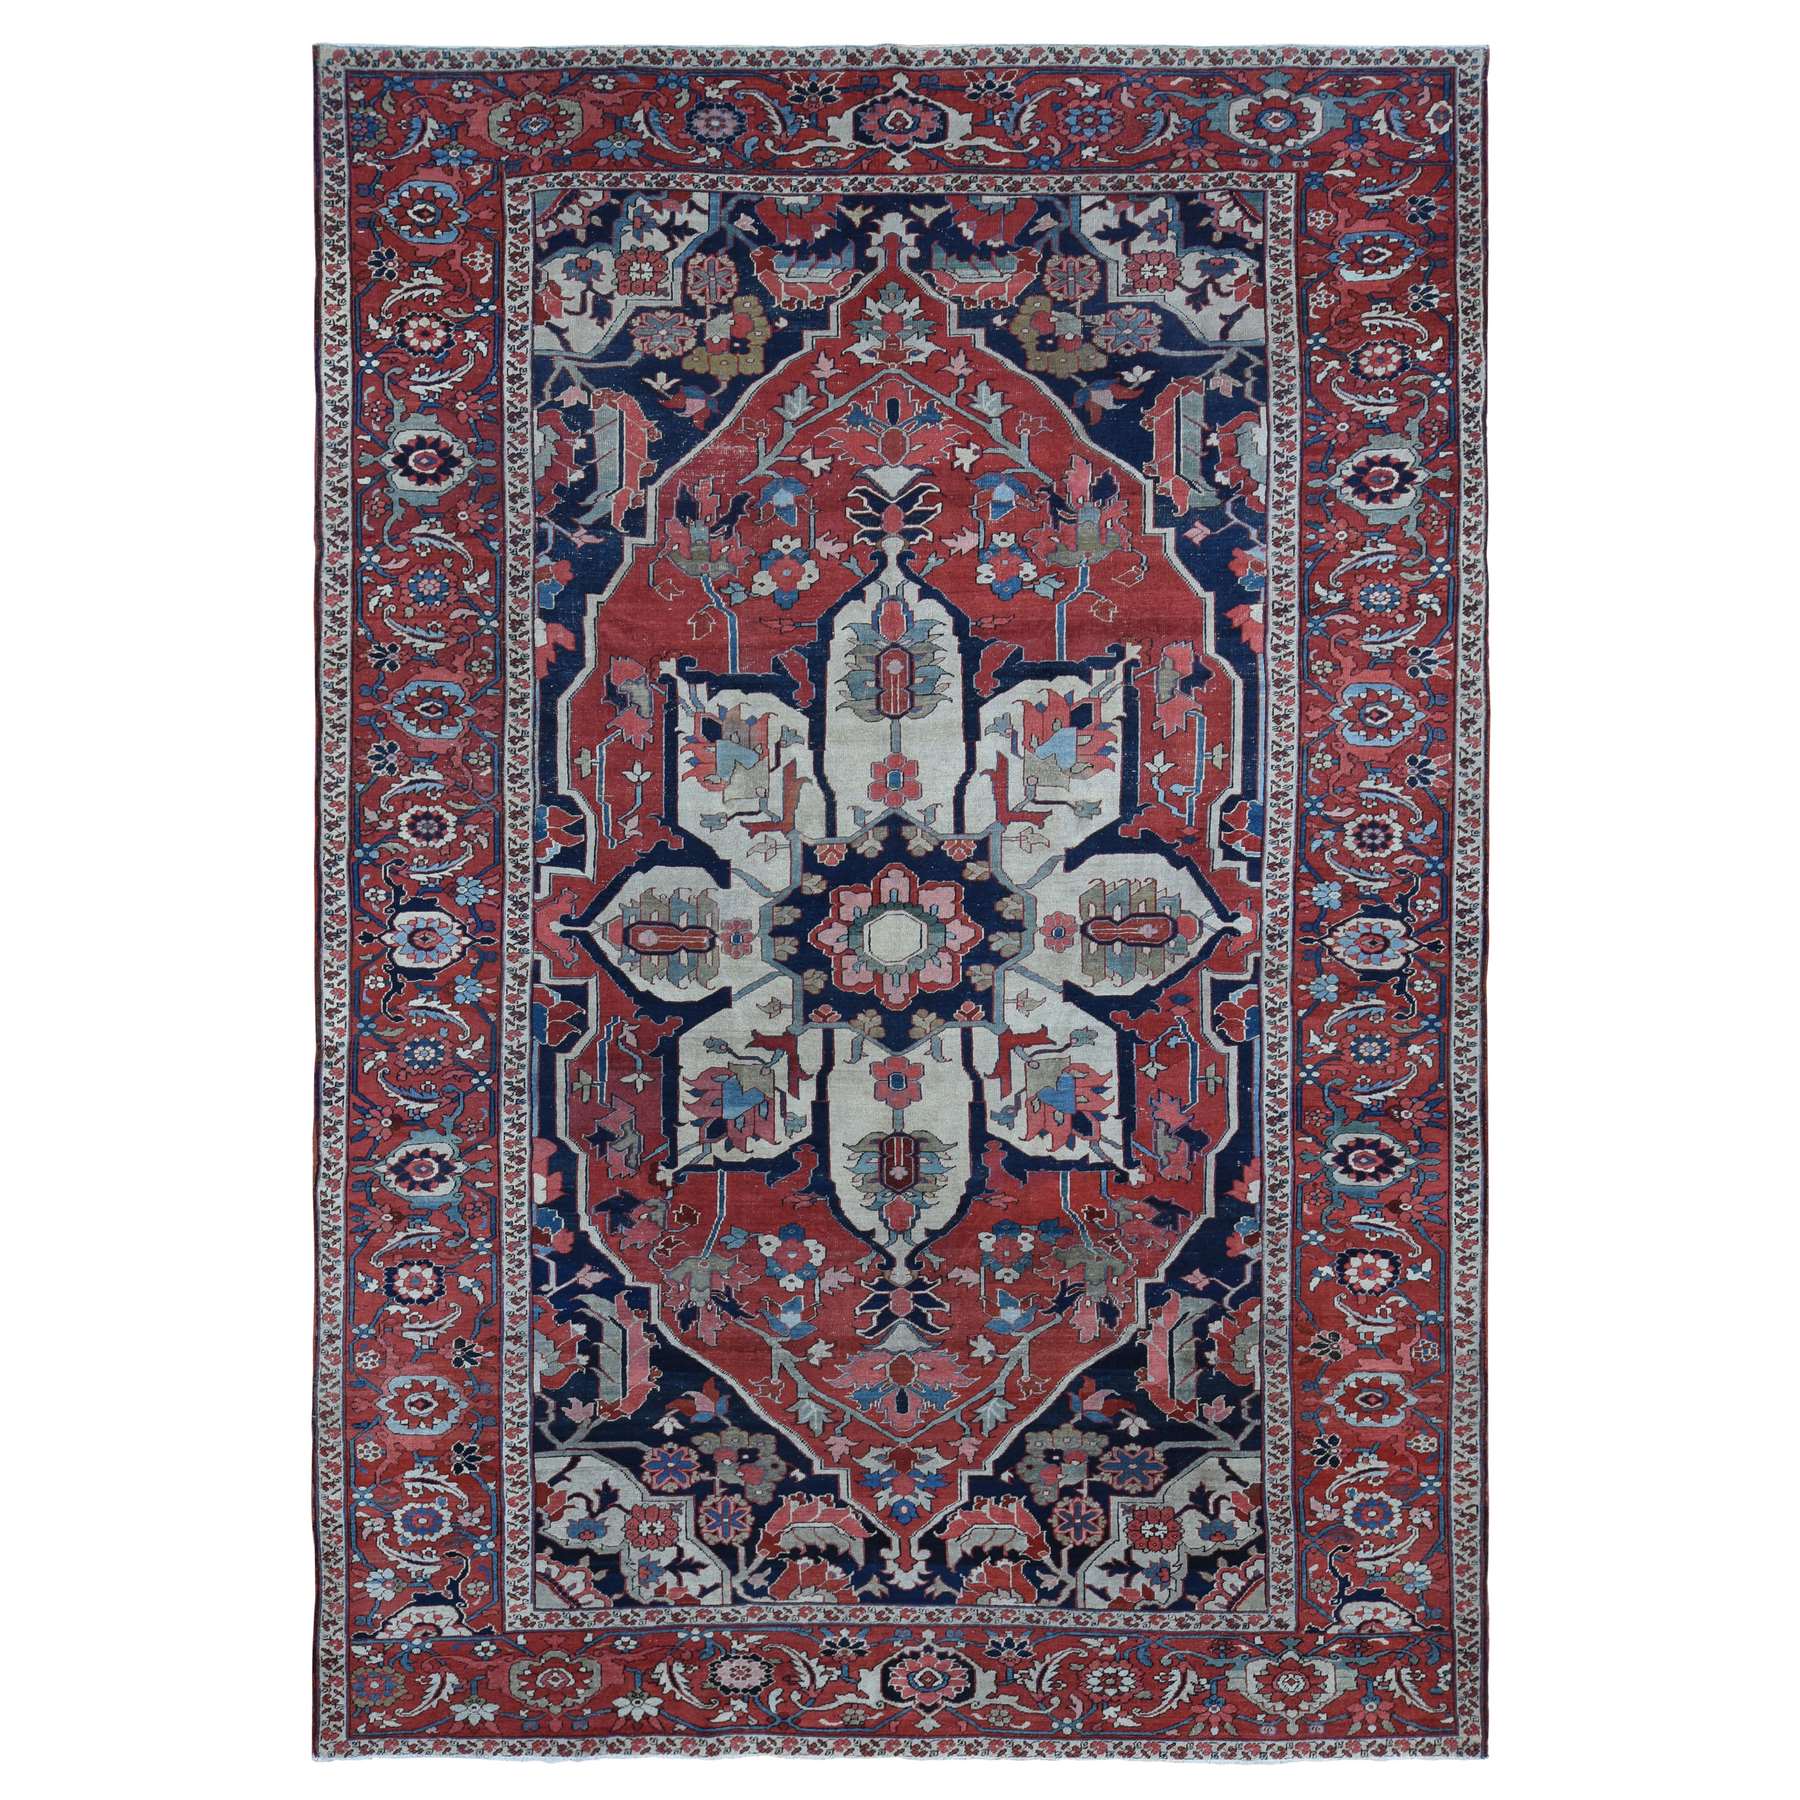  Wool Hand-Knotted Area Rug 9'1